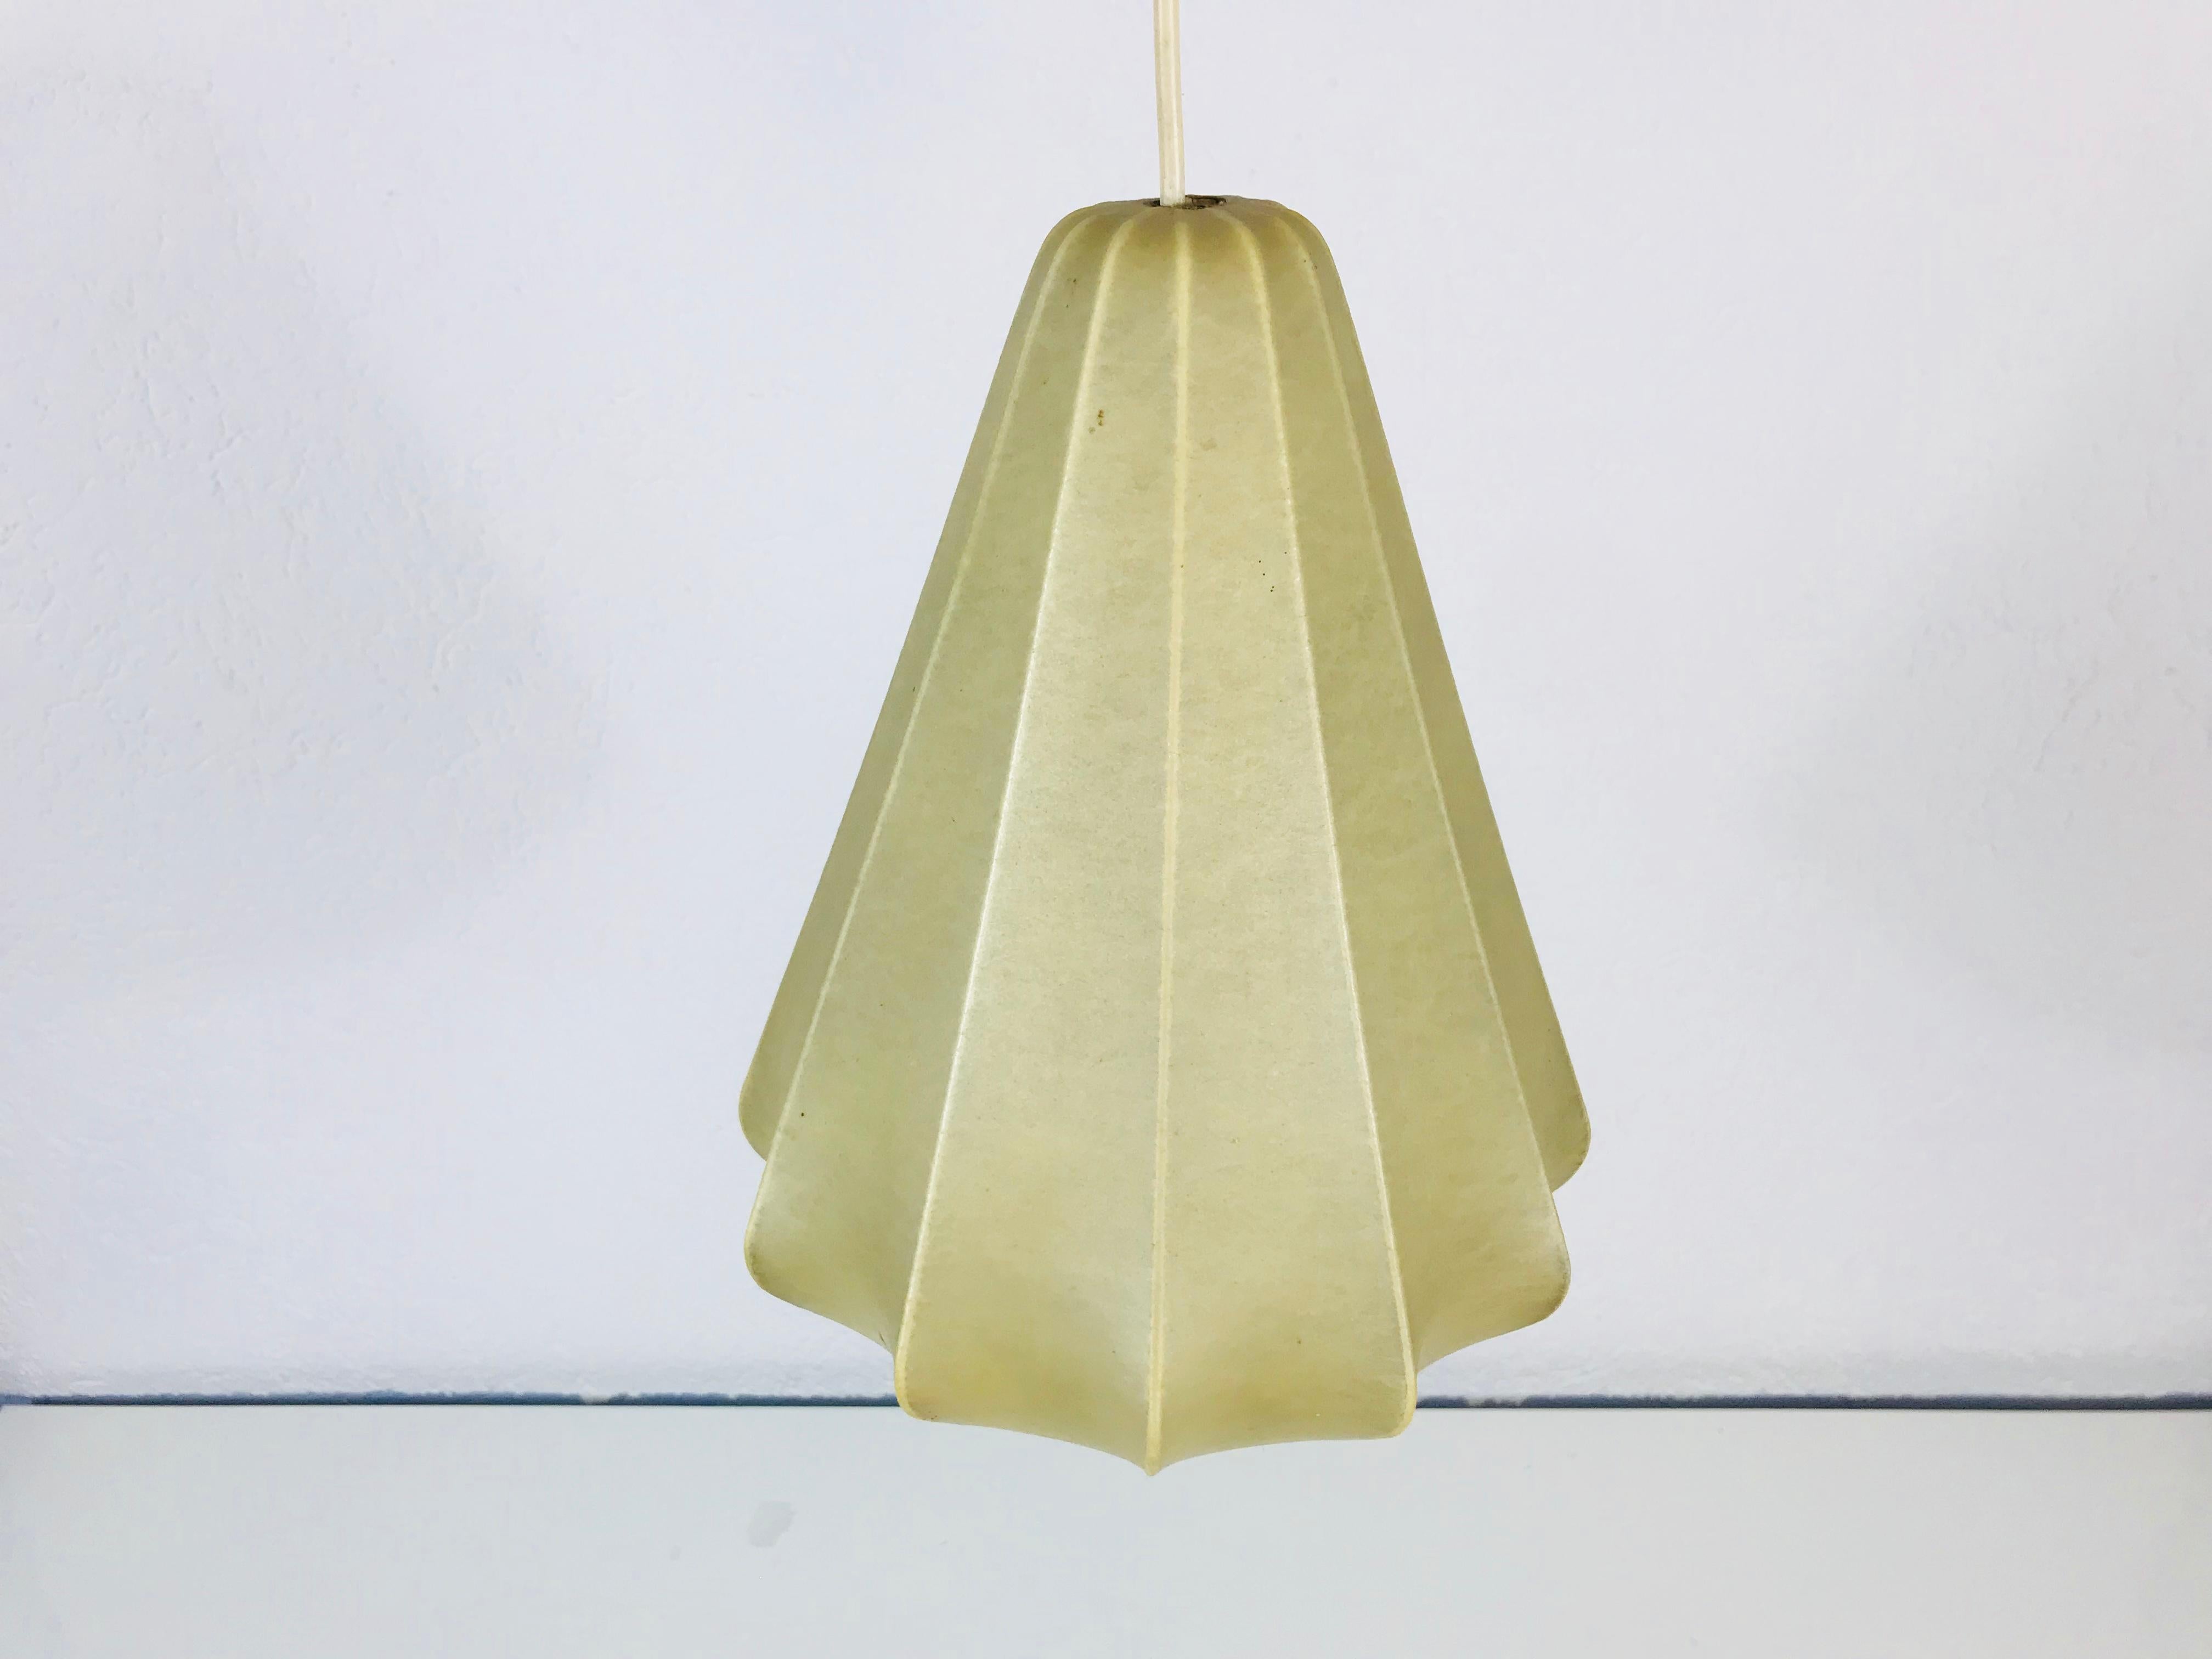 A cocoon pendant lamp made in Italy in the 1960s. The hanging lamp has been manufactured in the design of the lamps made by Achille Castiglioni. The lamp shade is of original cocoon and has a flower shape.

The light requires one E27 light